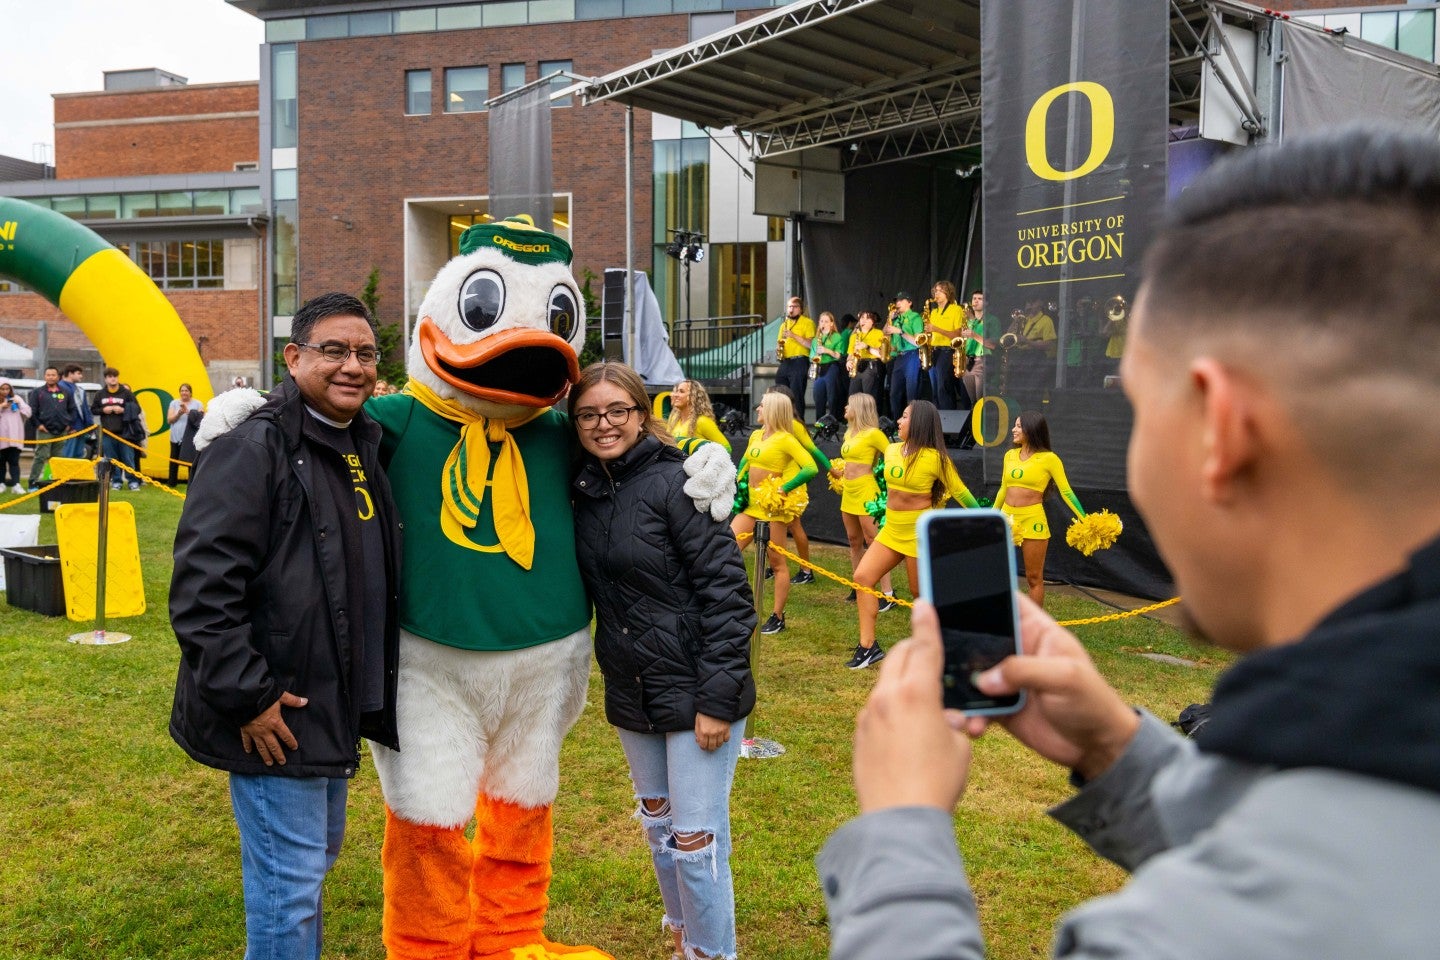 Two people posing for a photo with the Oregon Duck